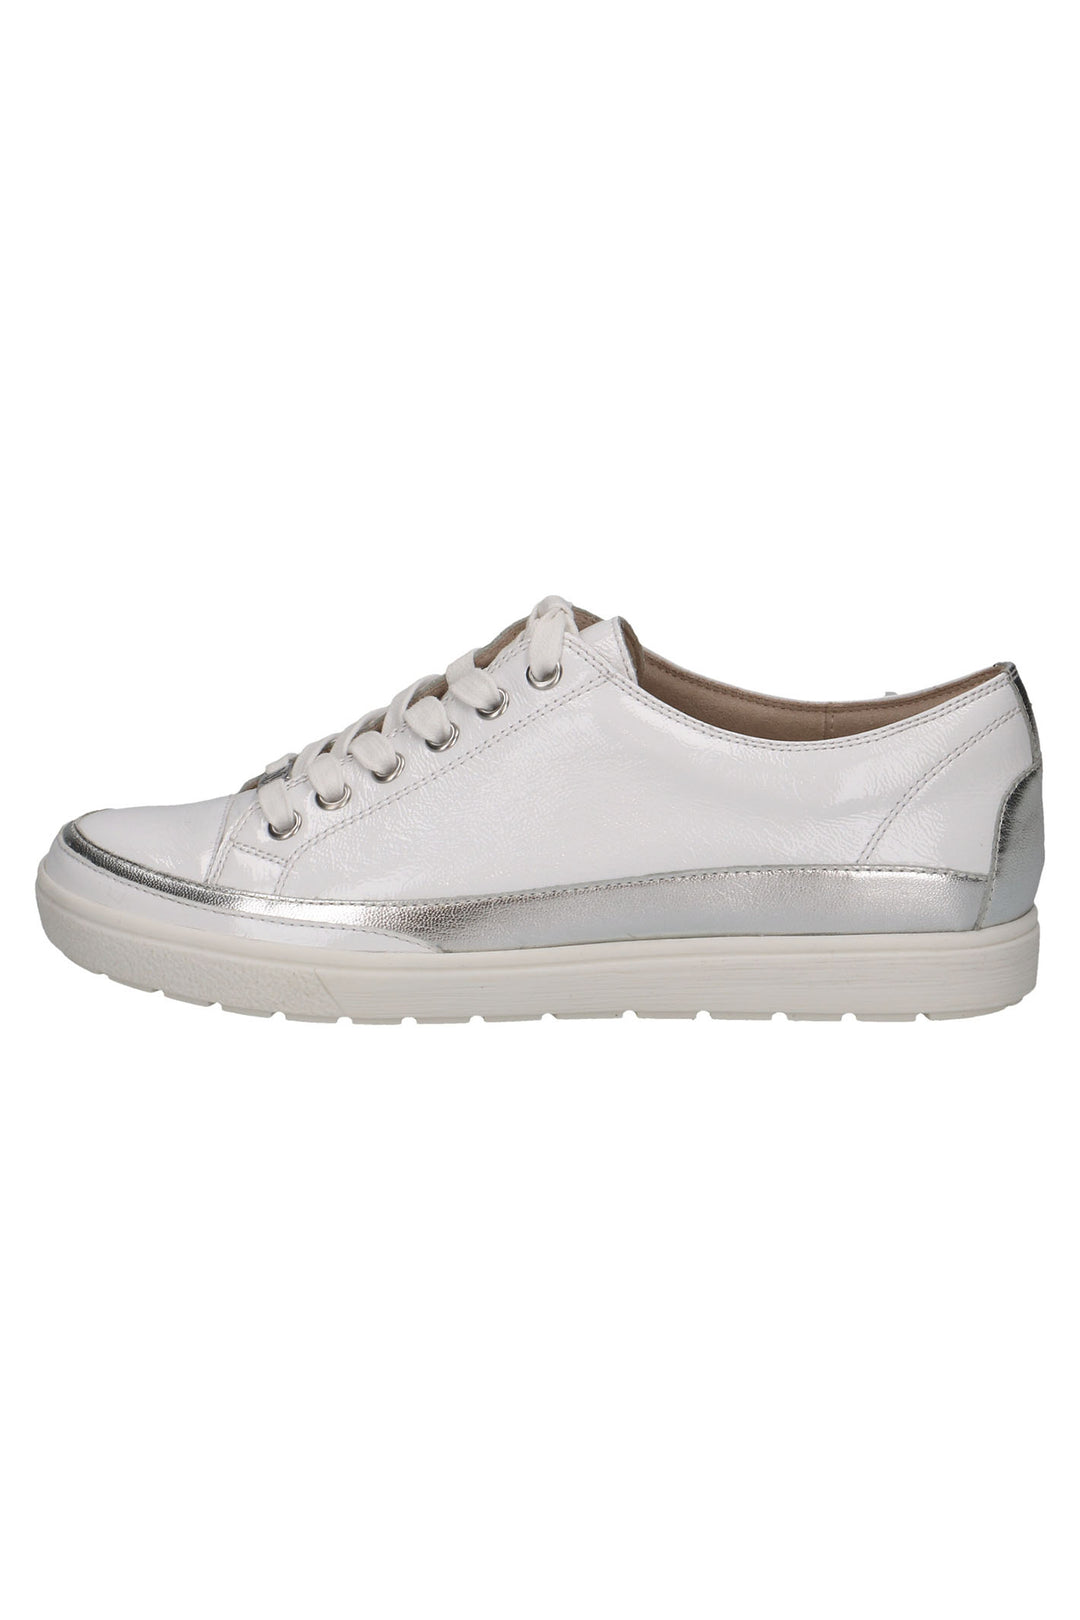 Caprice 9-23654-42 White Air Motion Leather Trainer - Rouge Boutique